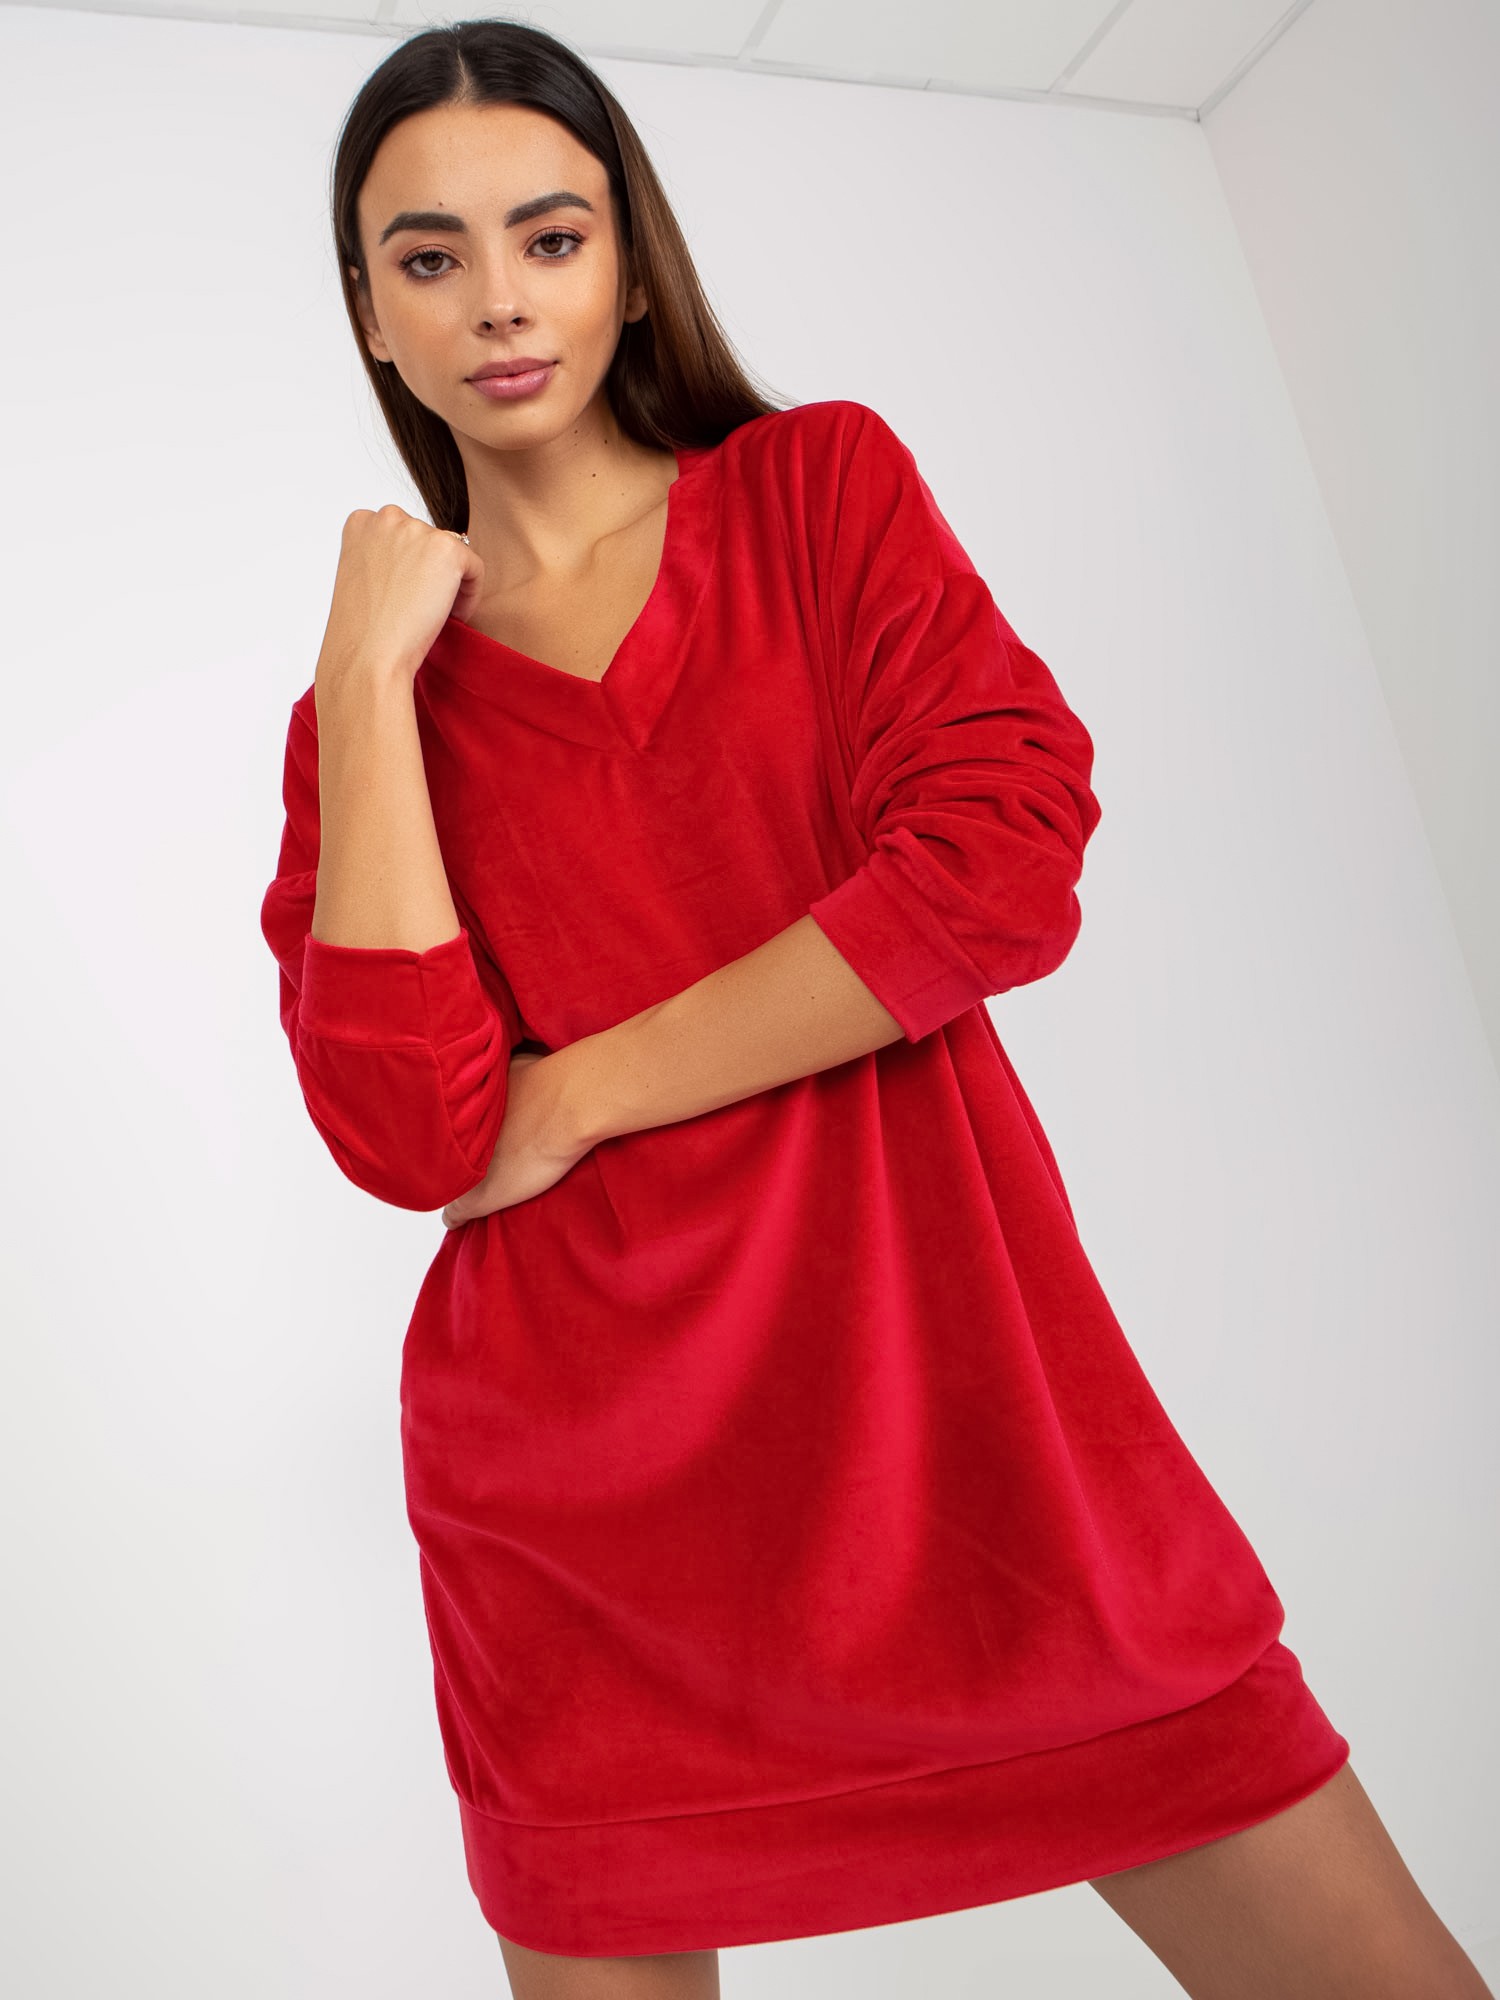 Red velor dress with long sleeves